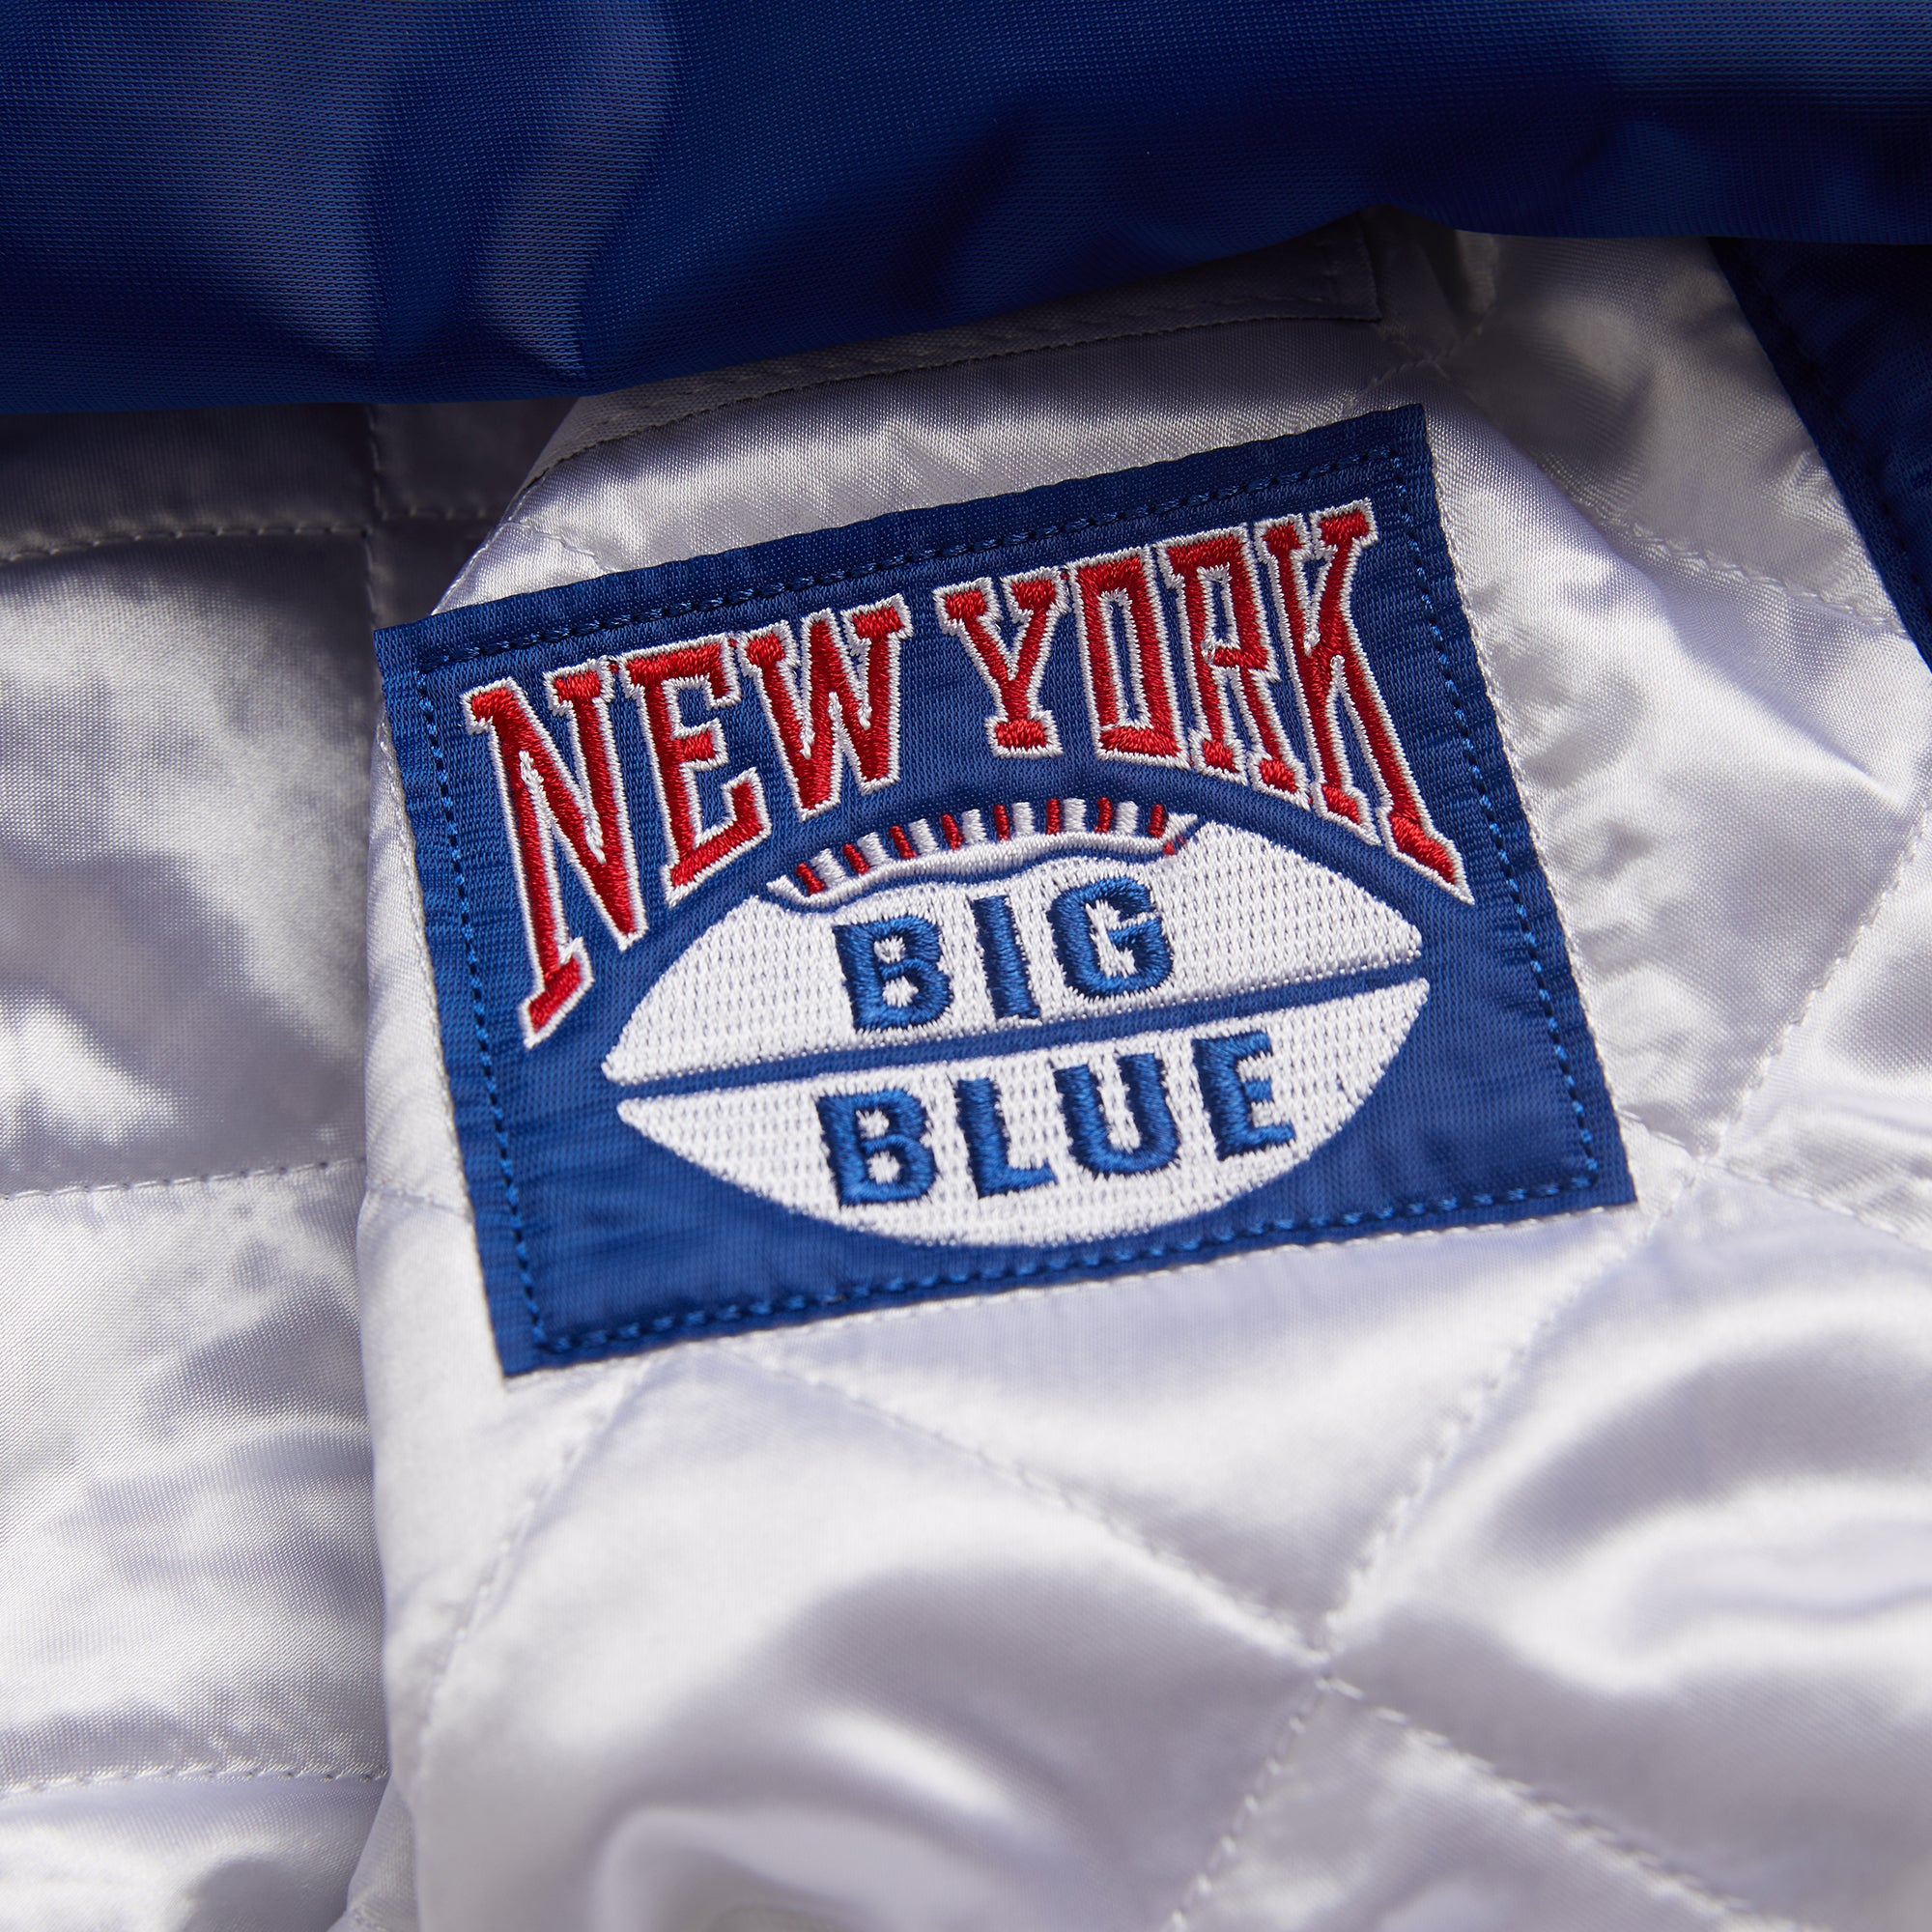 Starter Jackets Are Making a Comeback, Thanks to Former Giants